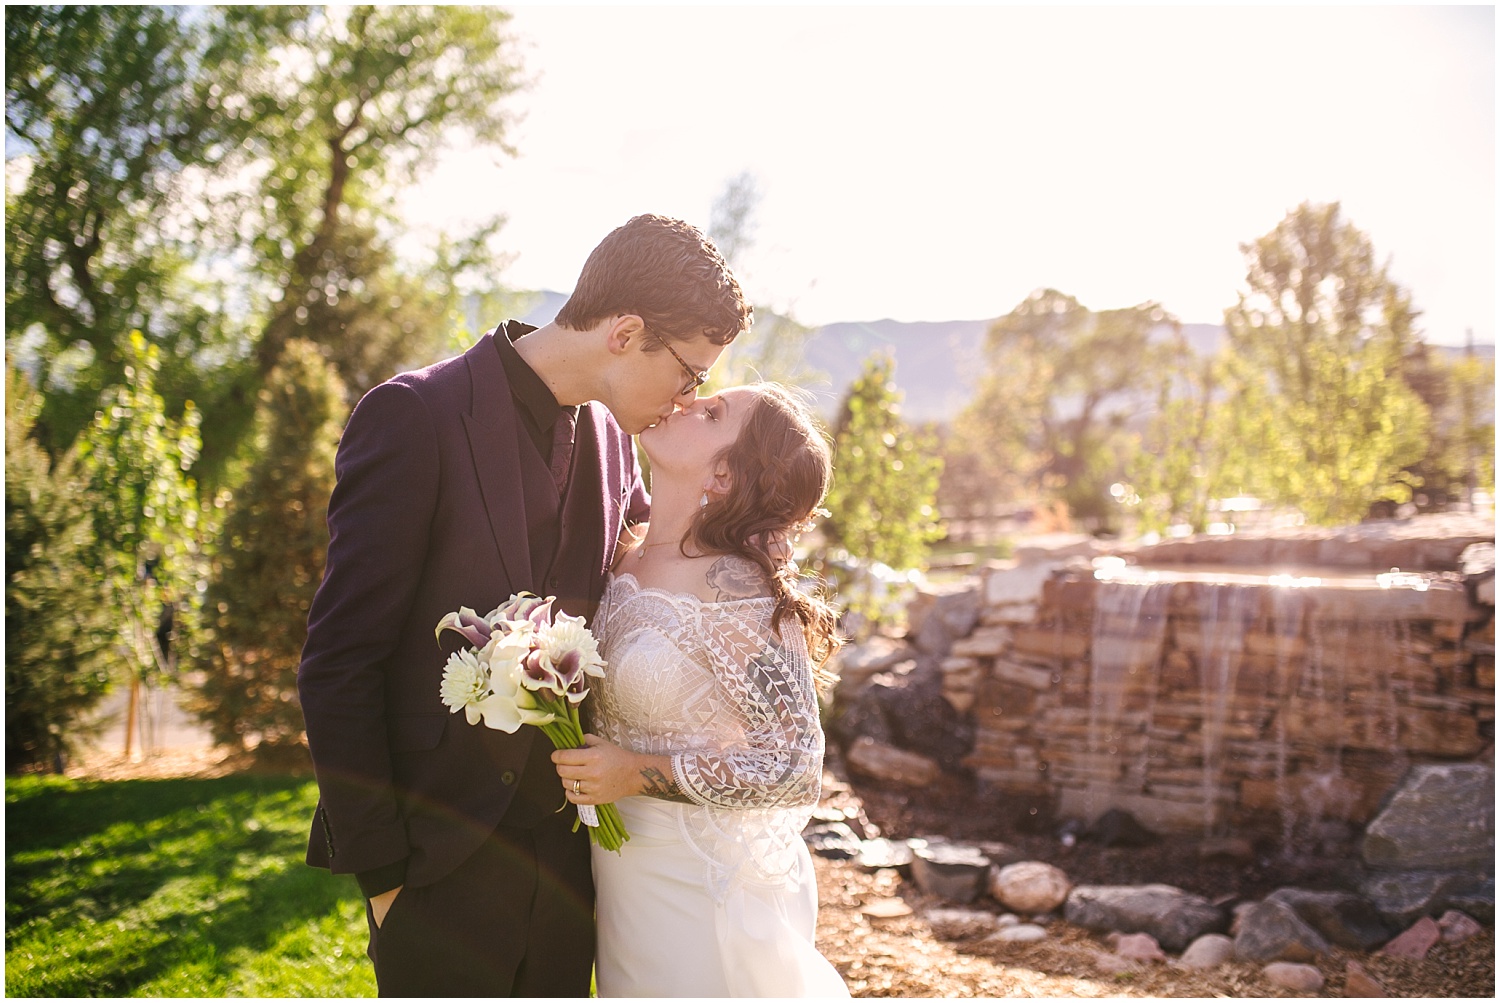 Bride and groom kissing on the lawn at Hearth House Venue wedding in Monument, Colorado